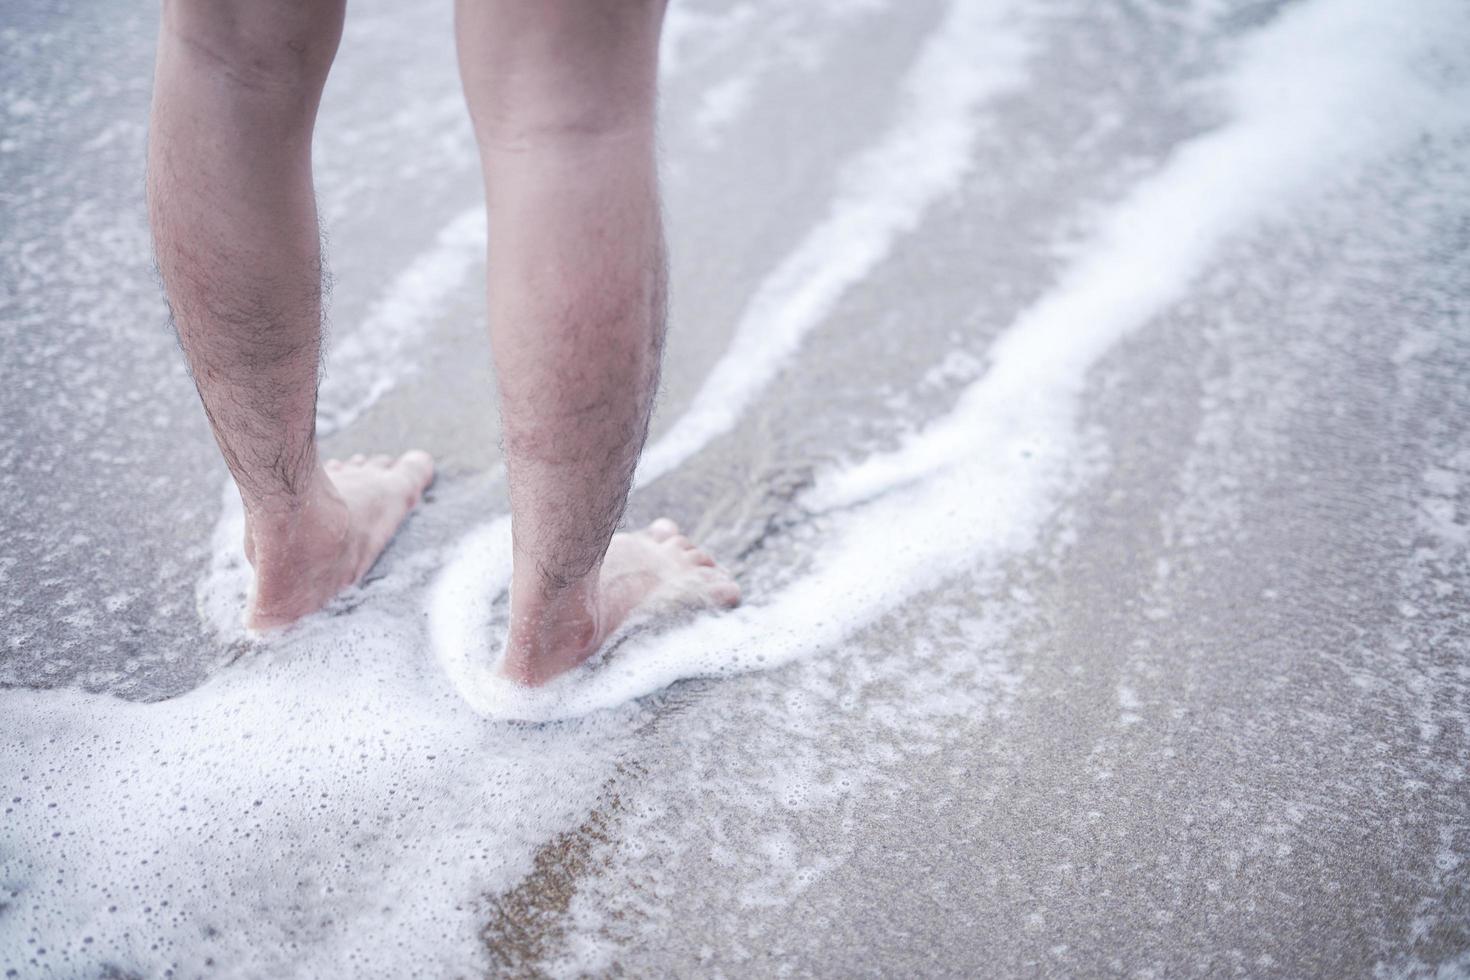 enjoy the gentle lapping of the foam waves on bare feet. go to the beach to enjoy vacation time by relaxing in the sea water and sandy beaches. photo